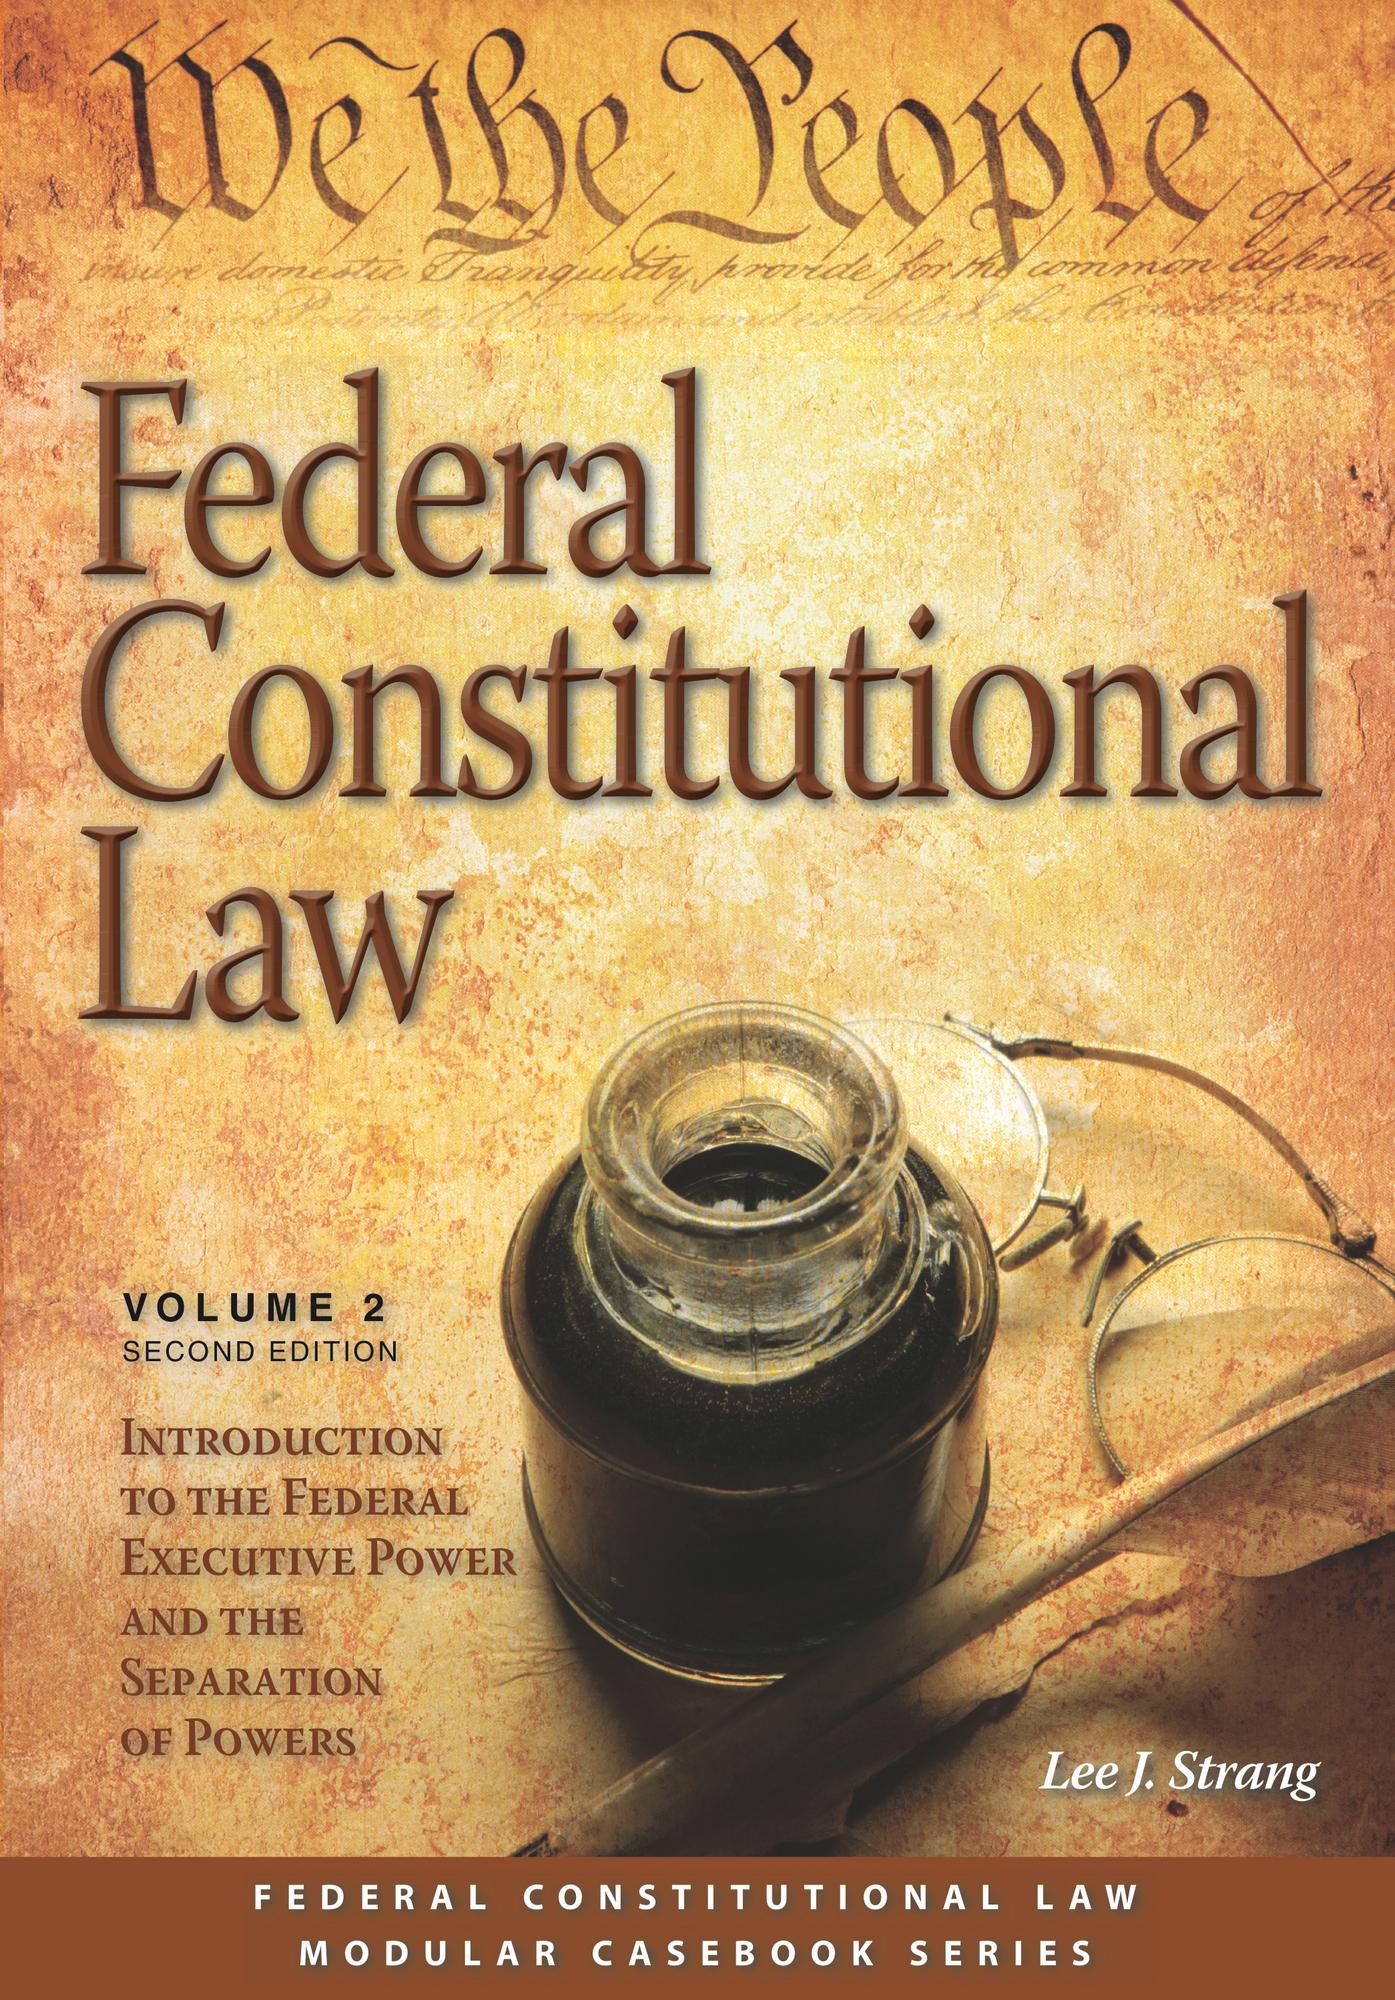 Federal Constitutional Law (Volume 2)